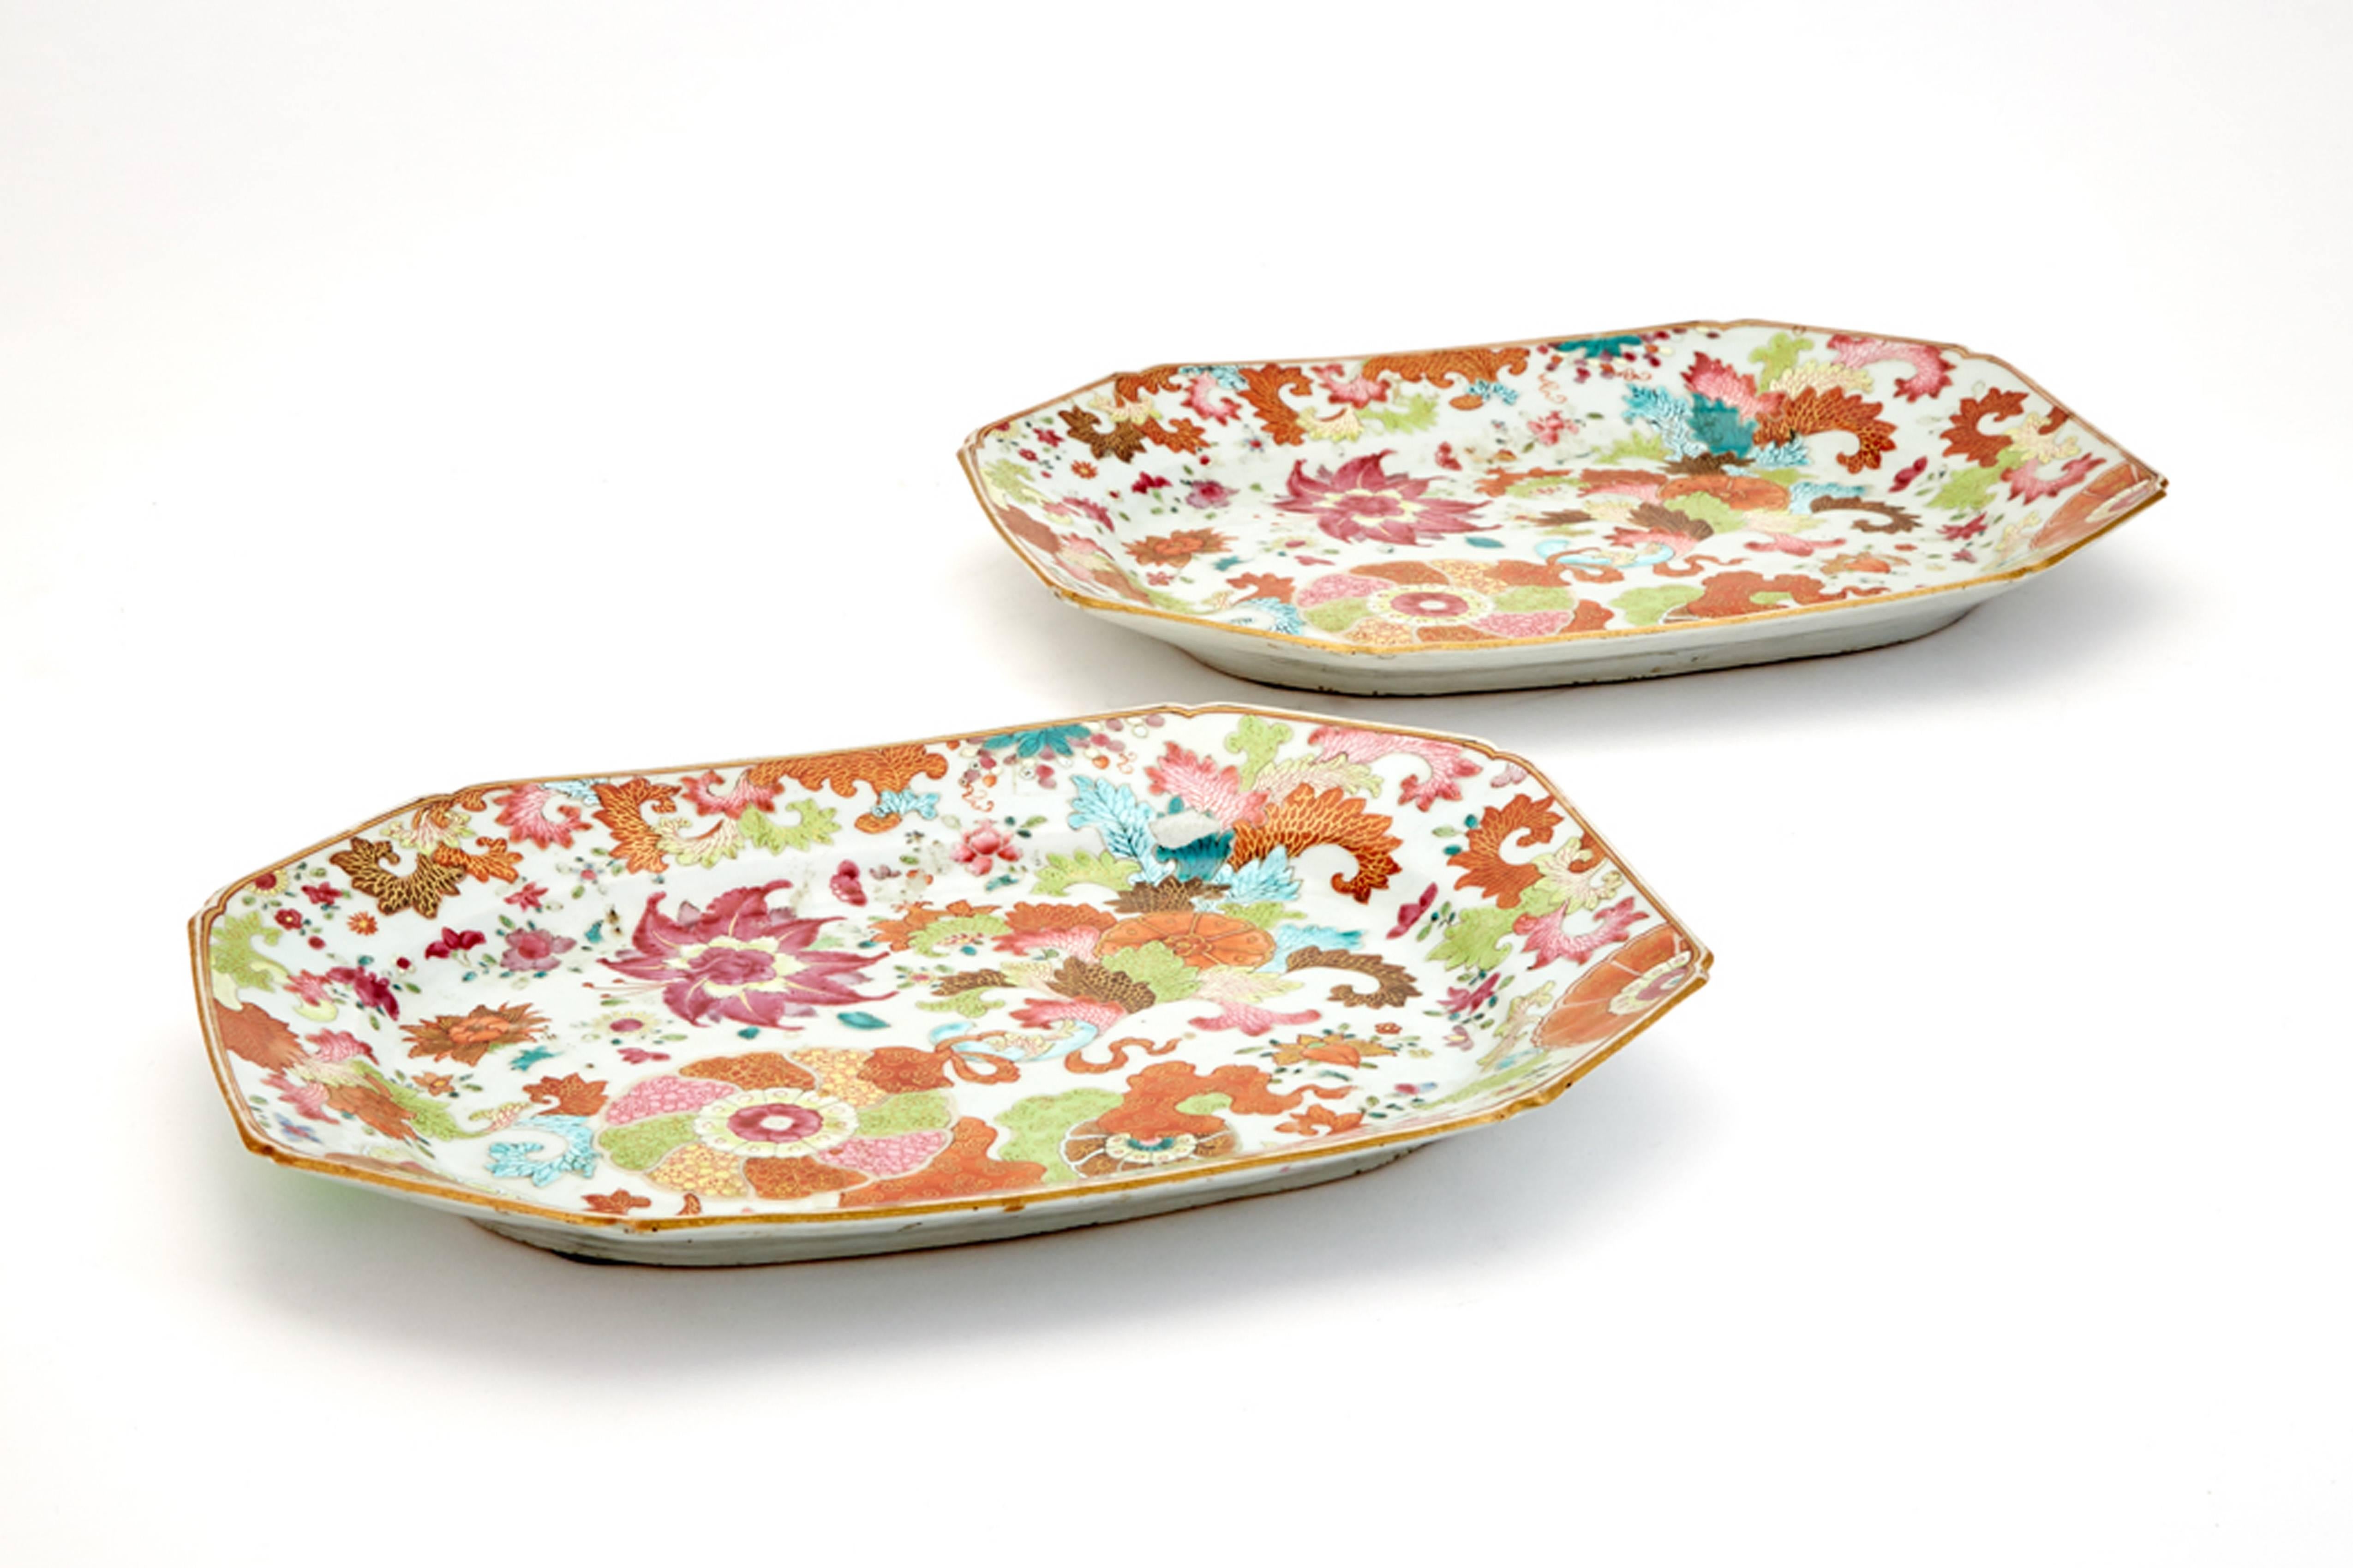 18th Century Chinese Export Porcelain Tobacco Leaf Pair of Dishes, circa 1765-1775